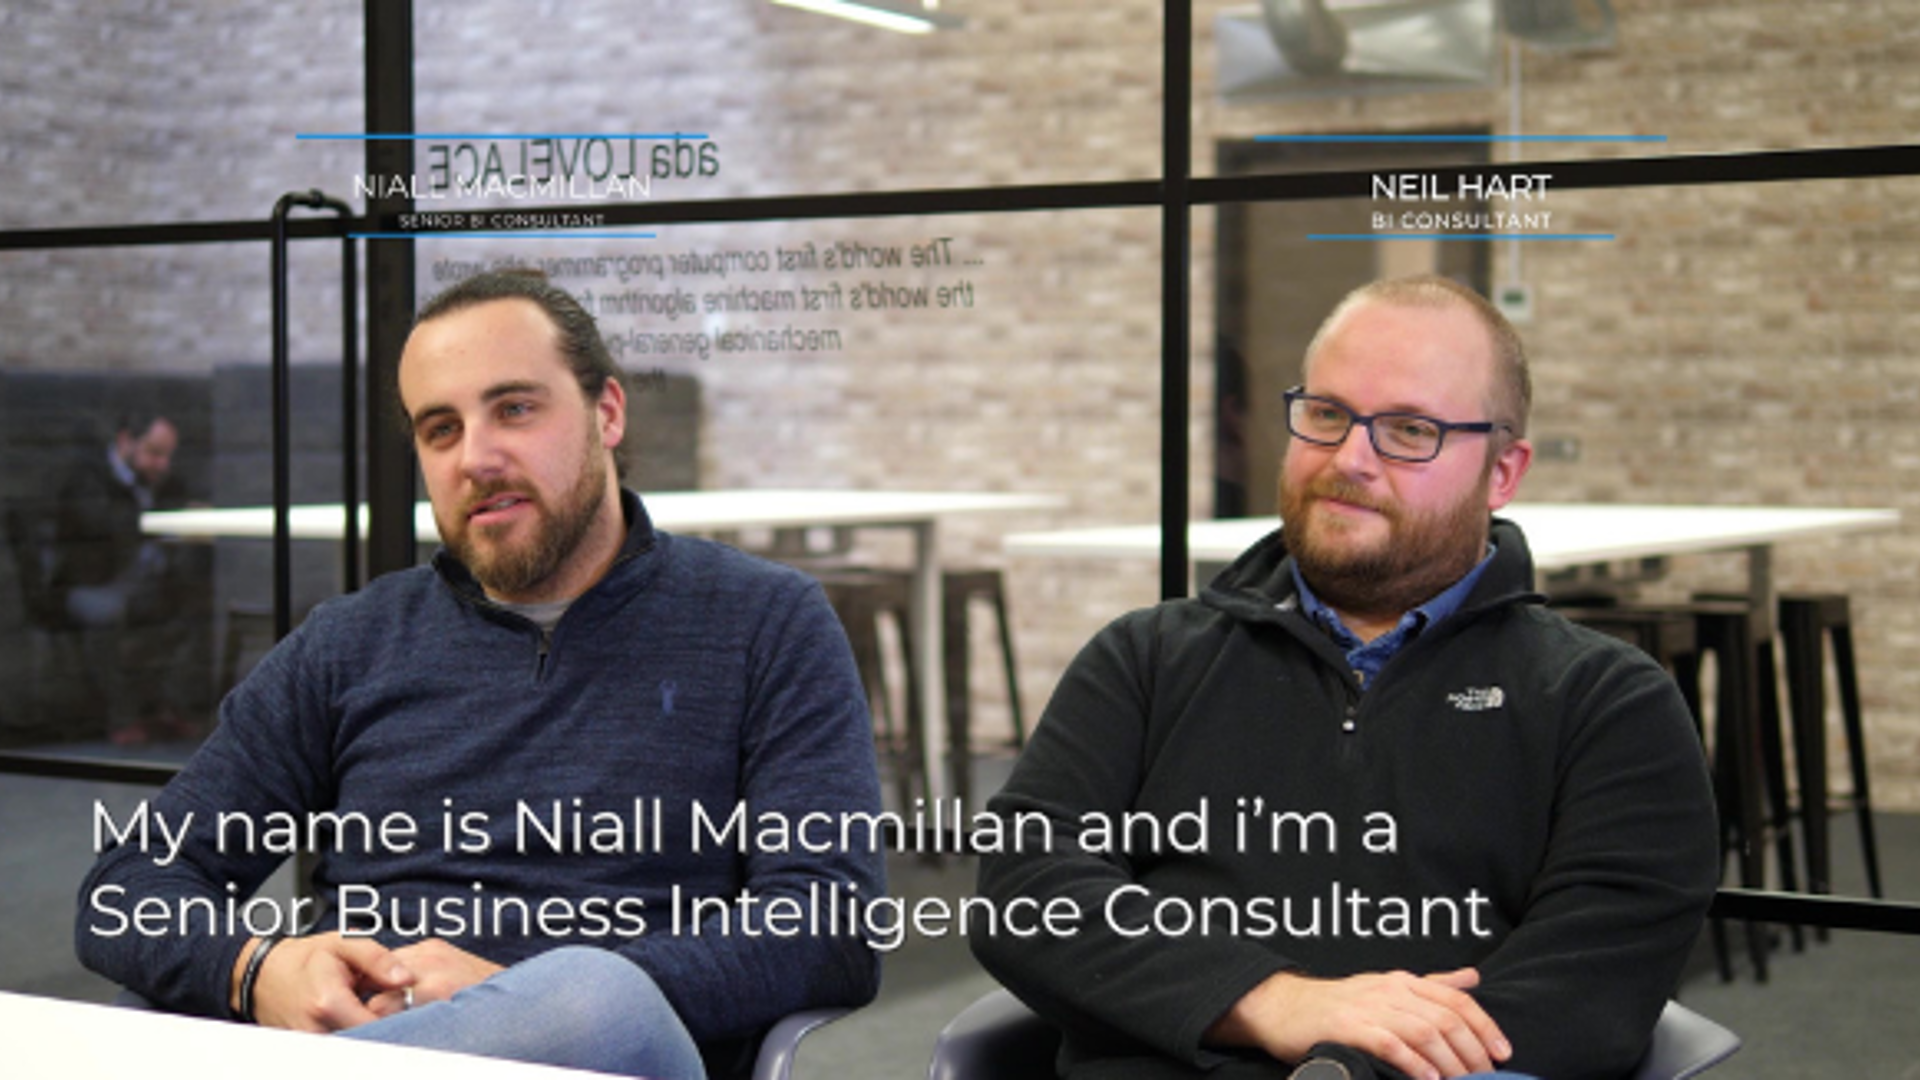 Careers Video - Niall and Neil - UK